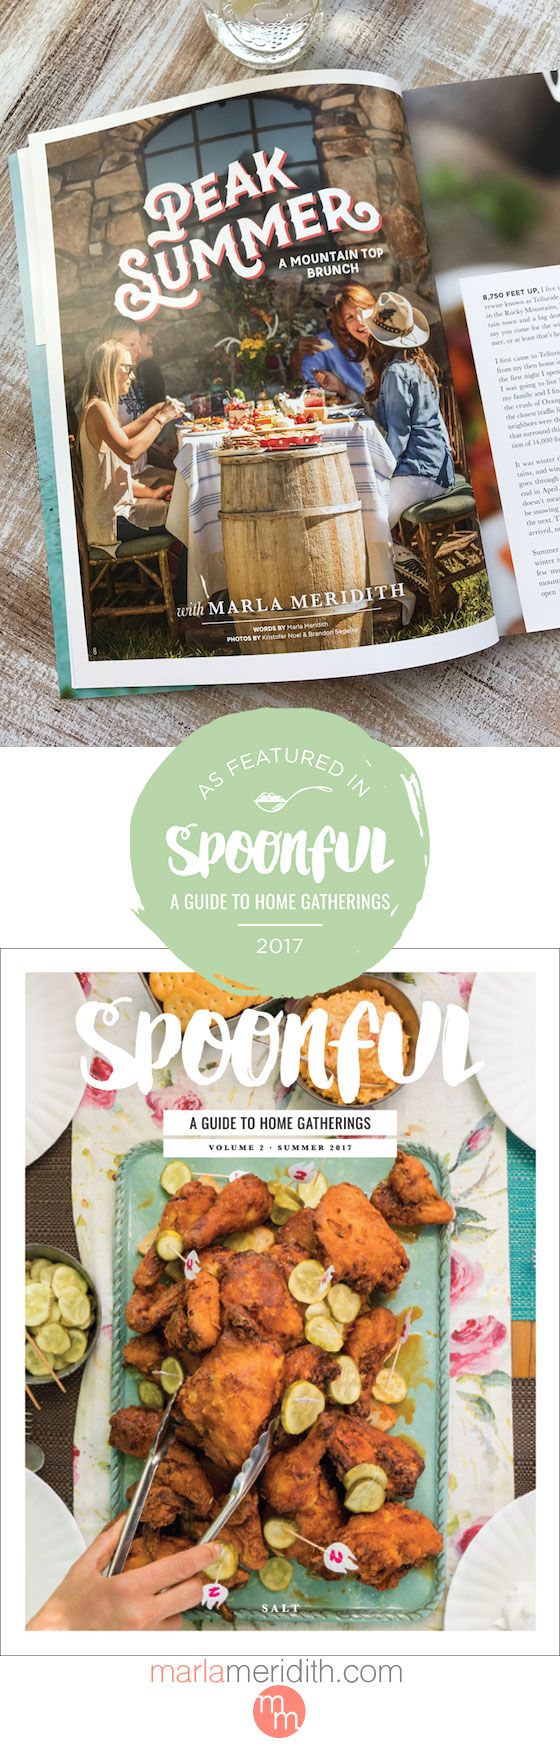 It's so exciting to be featured in Spoonful Magazine's Summer Issue "Salt" Get your copy today! MarlaMeridith.com ( @marlameridith )